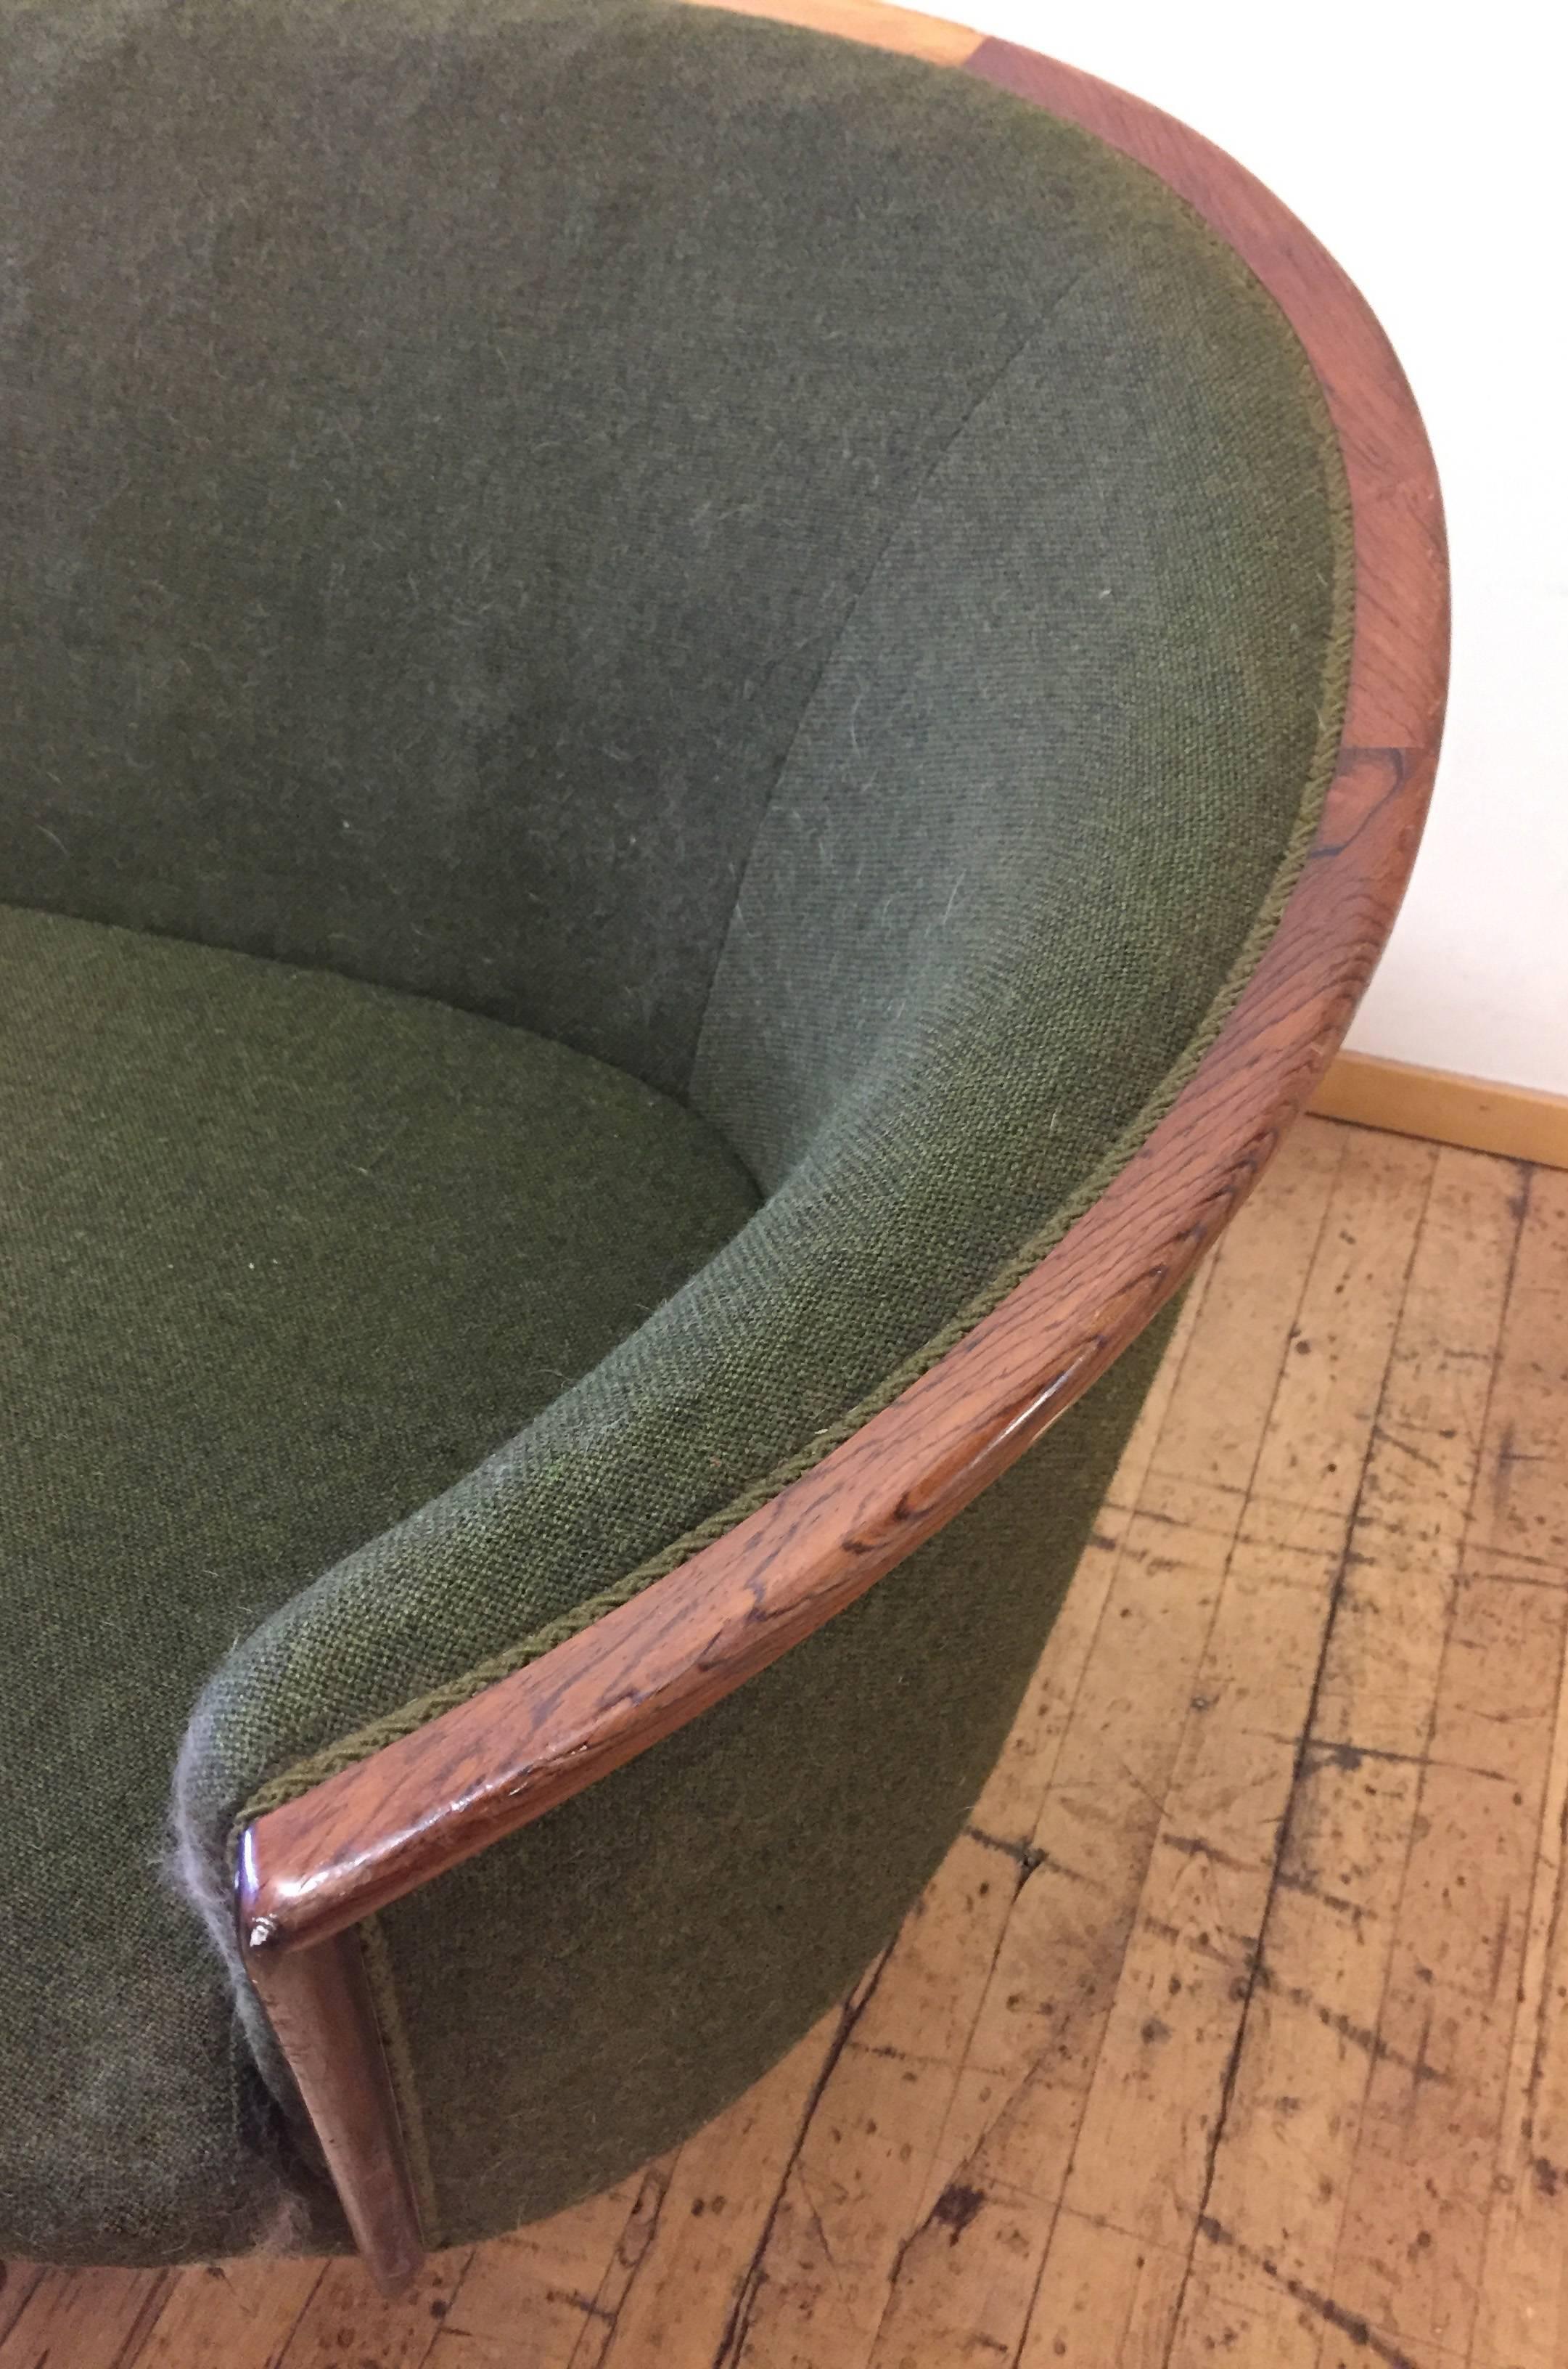 Rare Vintage Danish Modern Sofa by Pi Langlos Fabrikker, Stranda In Good Condition For Sale In Chicago, IL